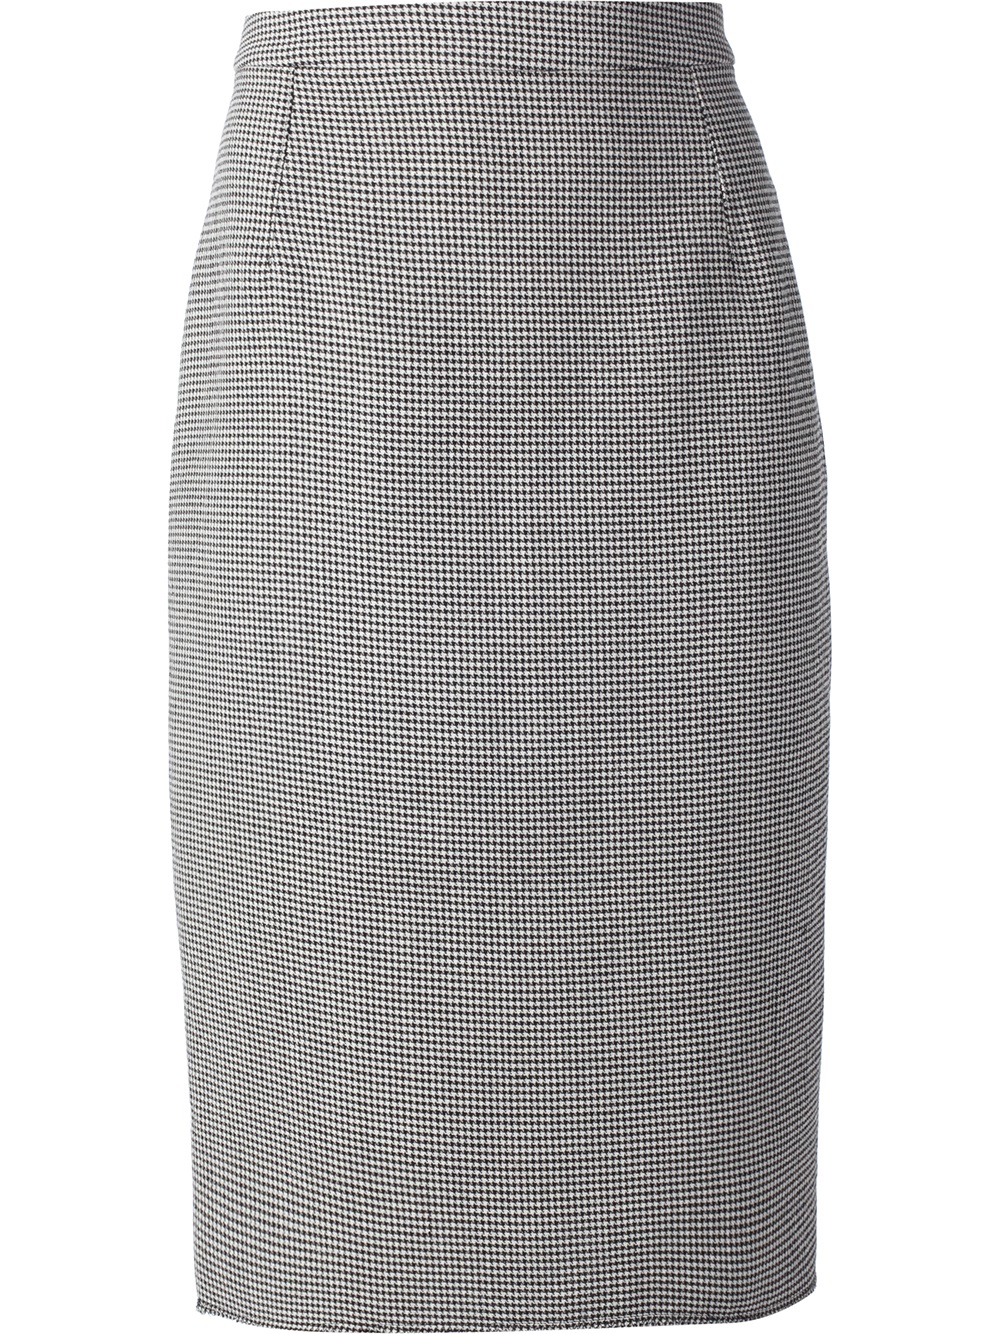 Lanvin Houndstooth Pencil Skirt in Gray (black) | Lyst